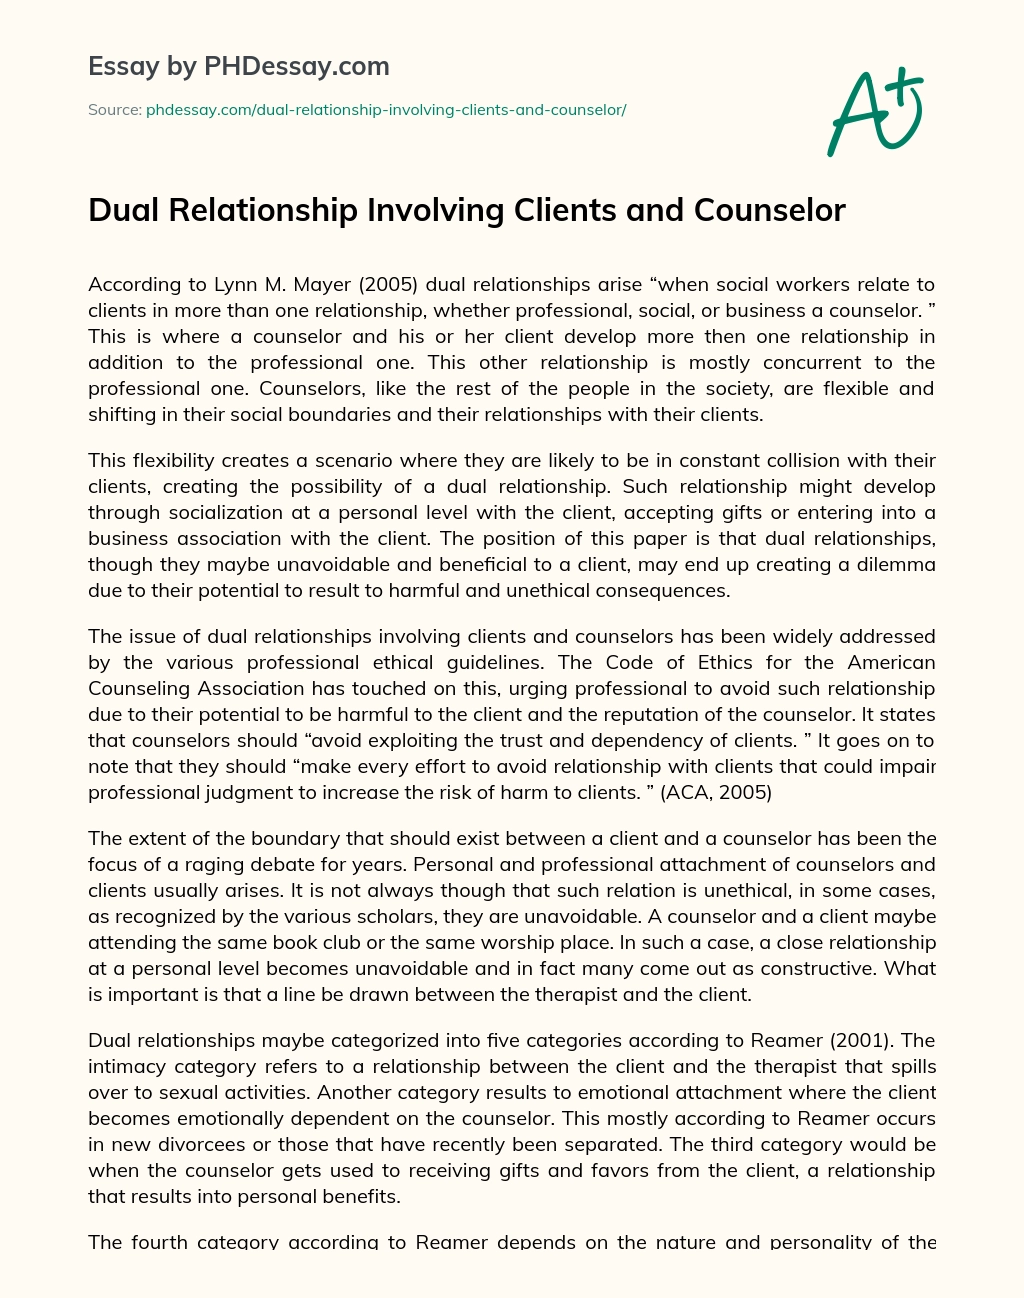 Dual Relationship Involving Clients and Counselor essay